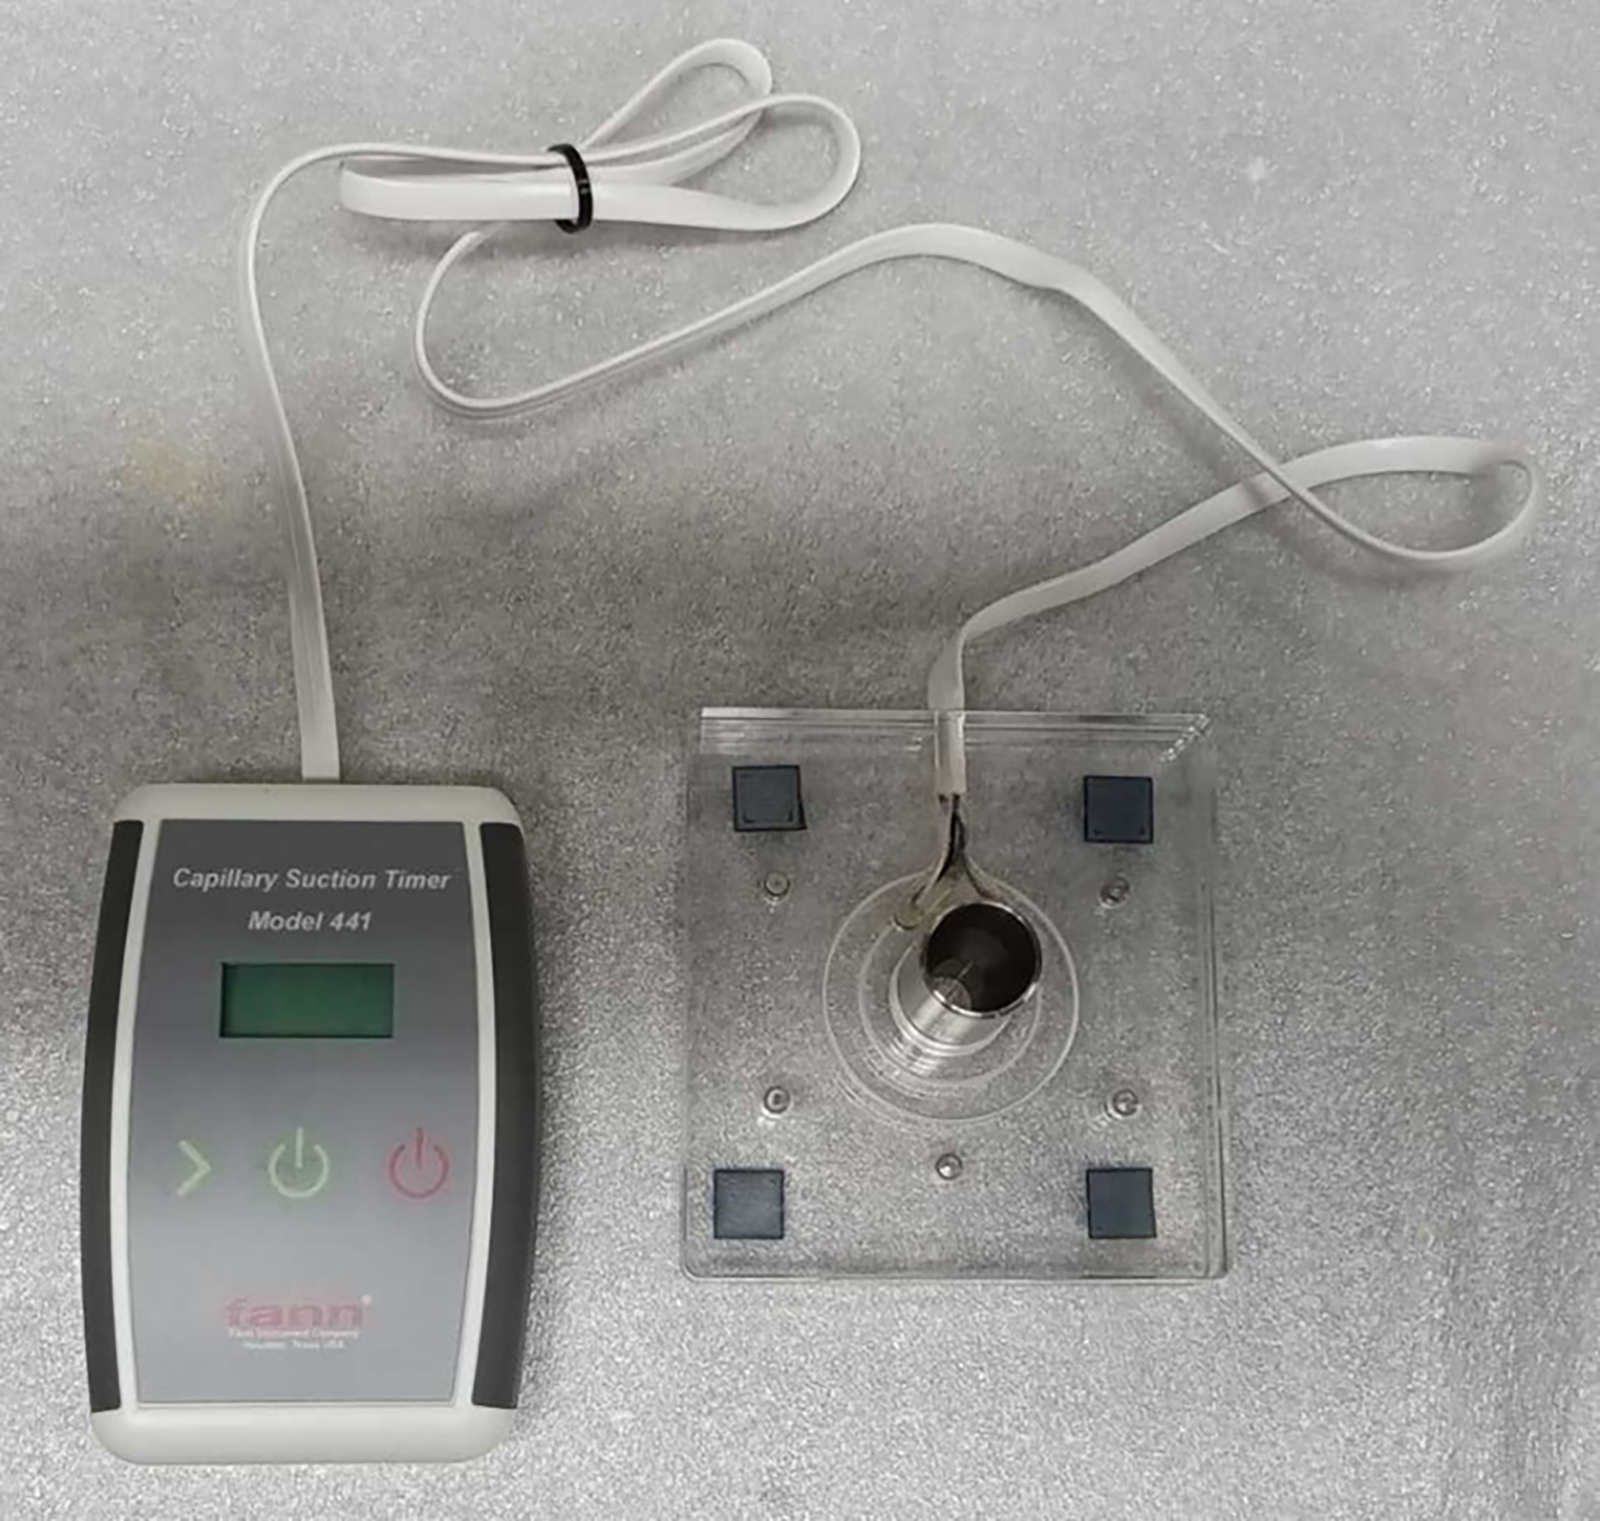 Capillary Suction Timer (CST) Model 440